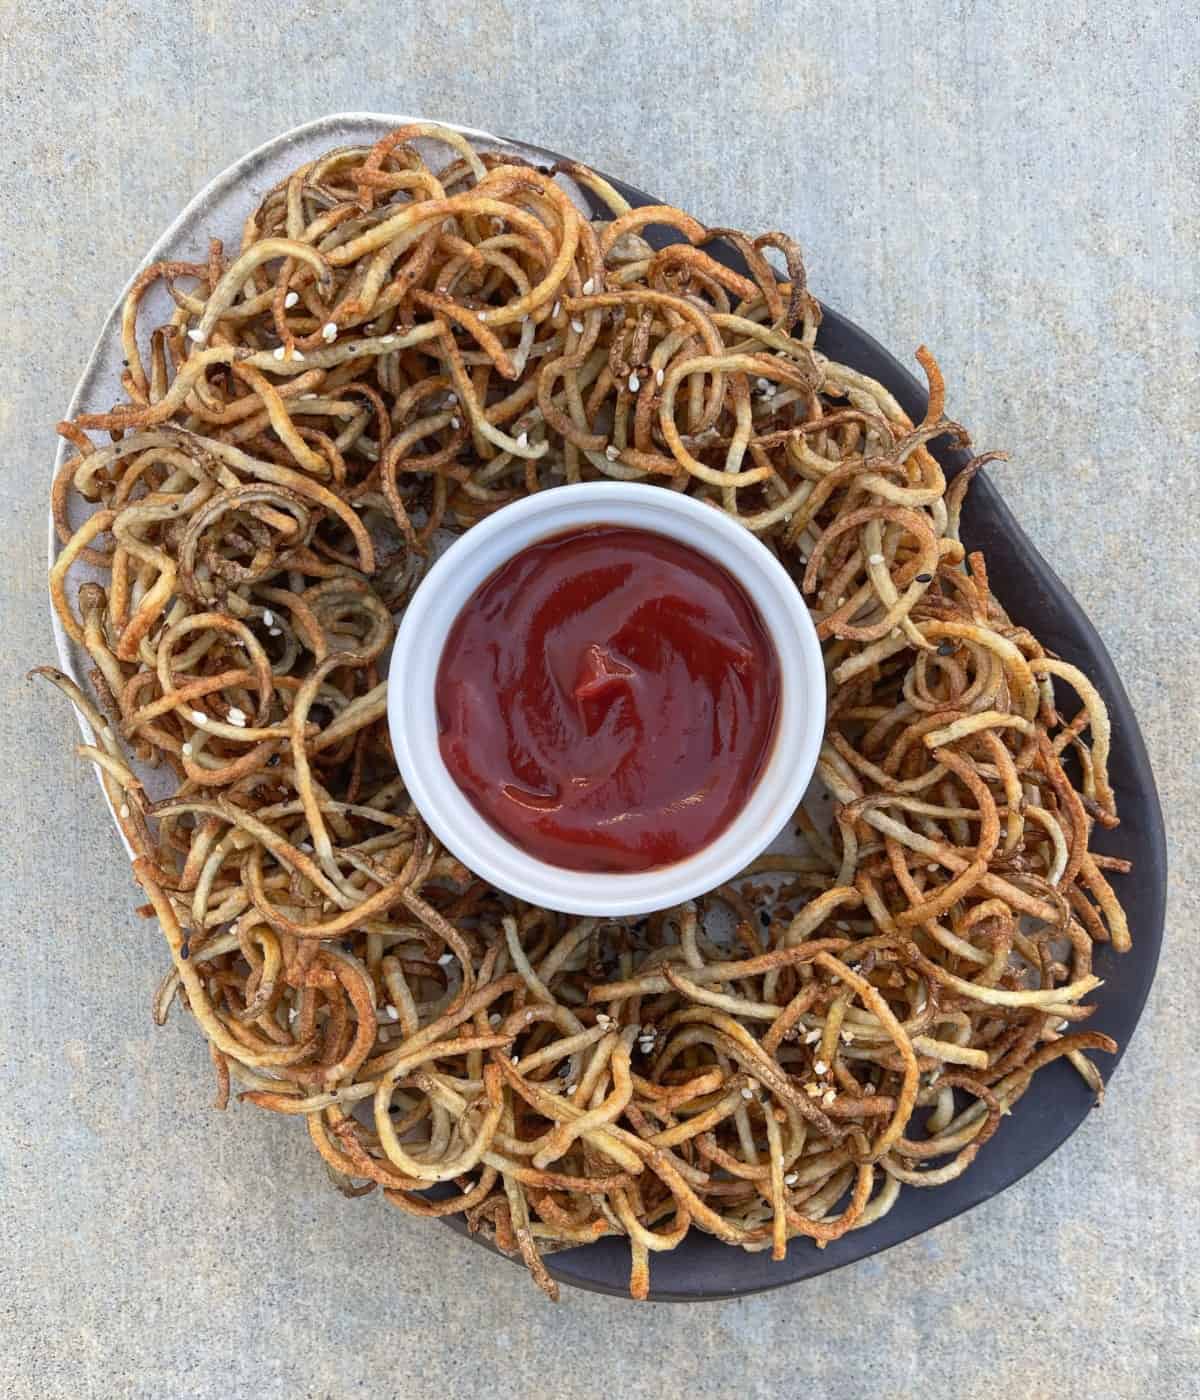 Crispy air fryer everything bagel shoestring curly fries on serving platter with ketchup.